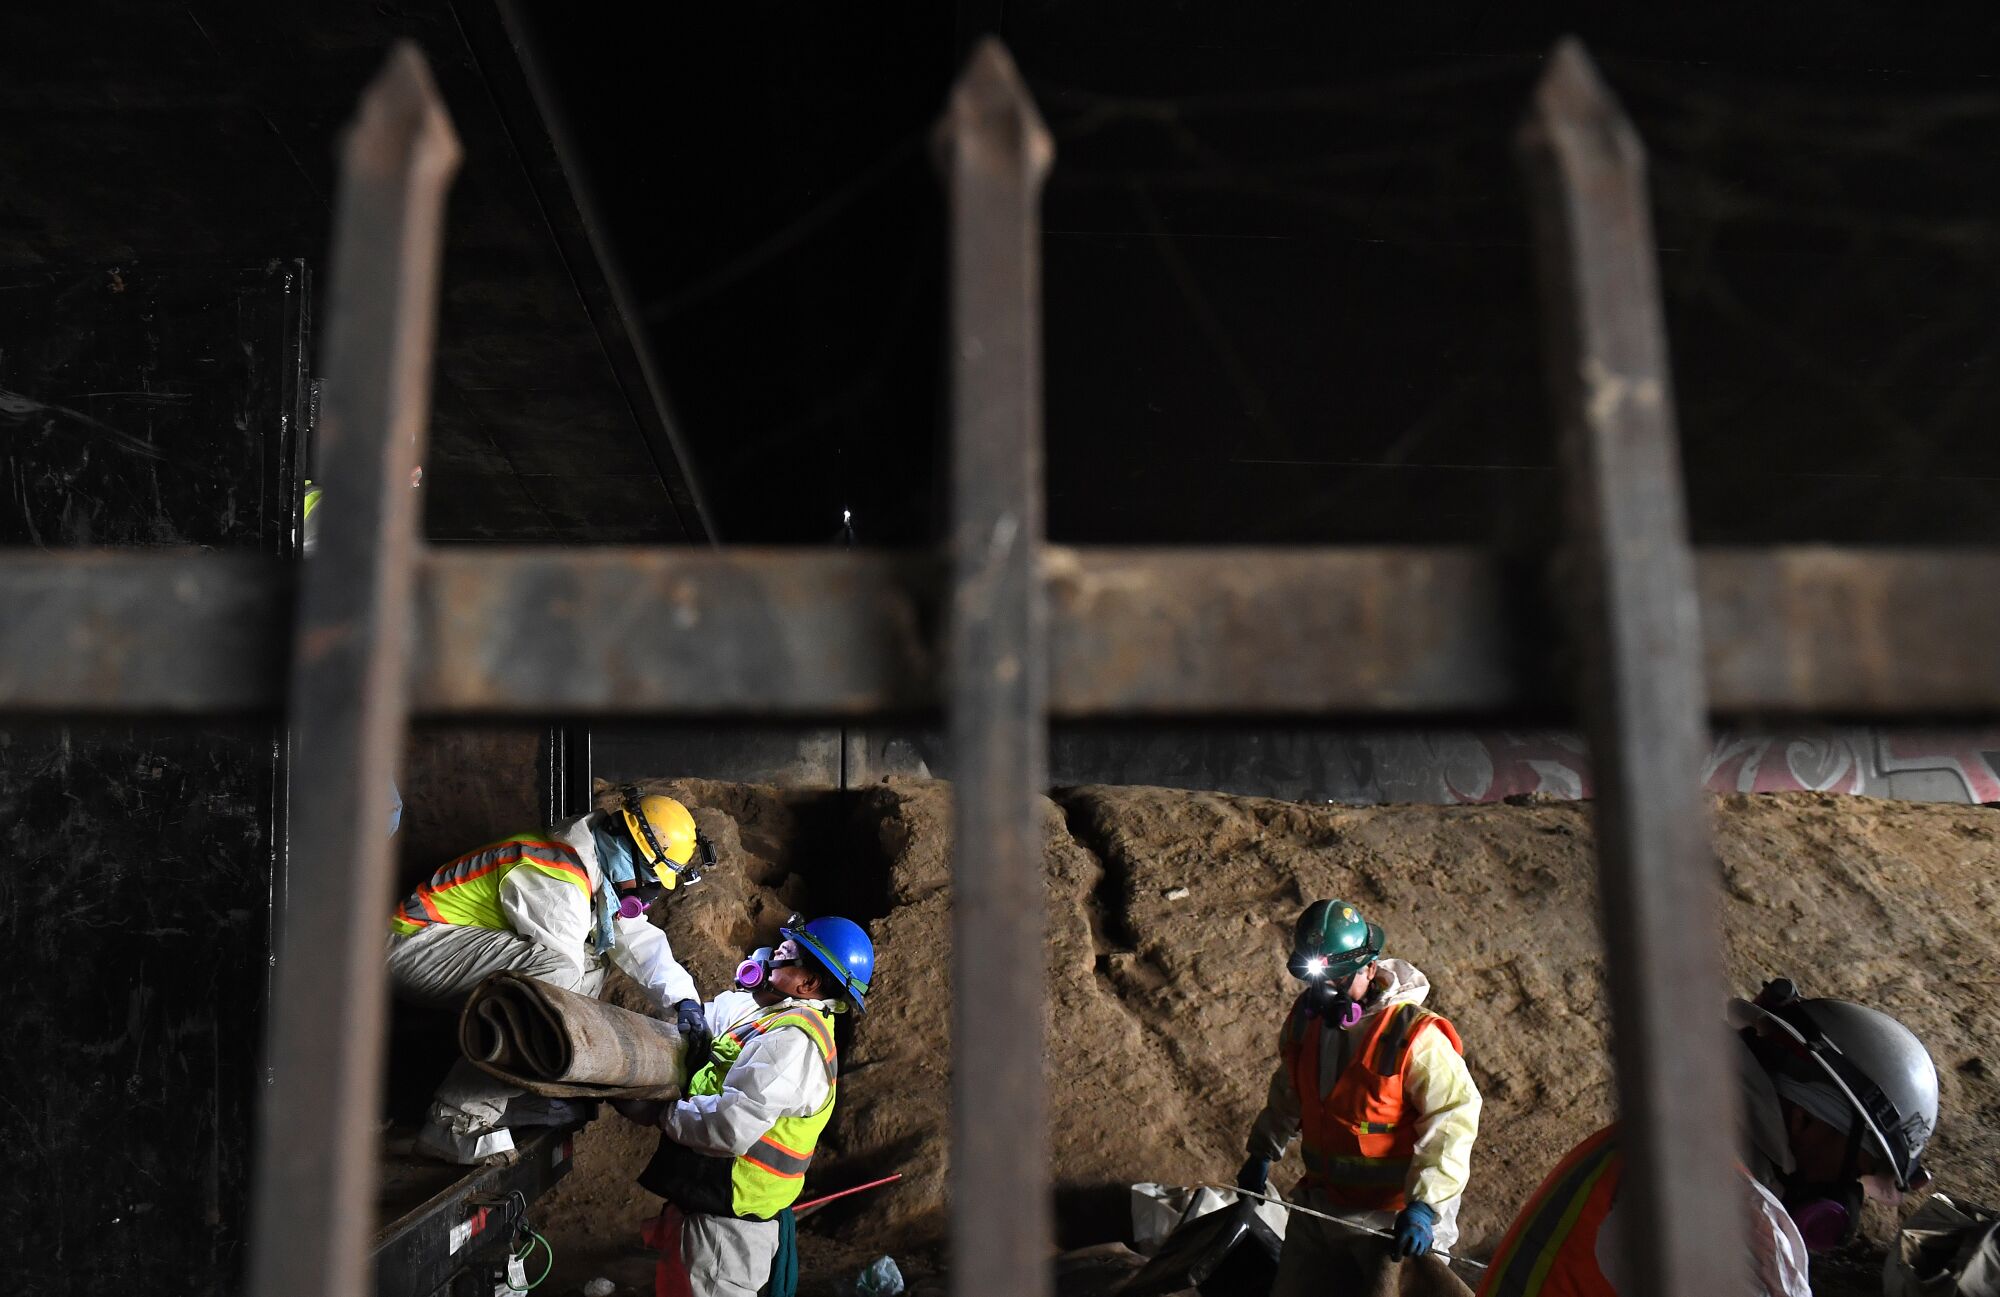 A cleanup crew is seen through wrought-iron gates along a freeway underpass.